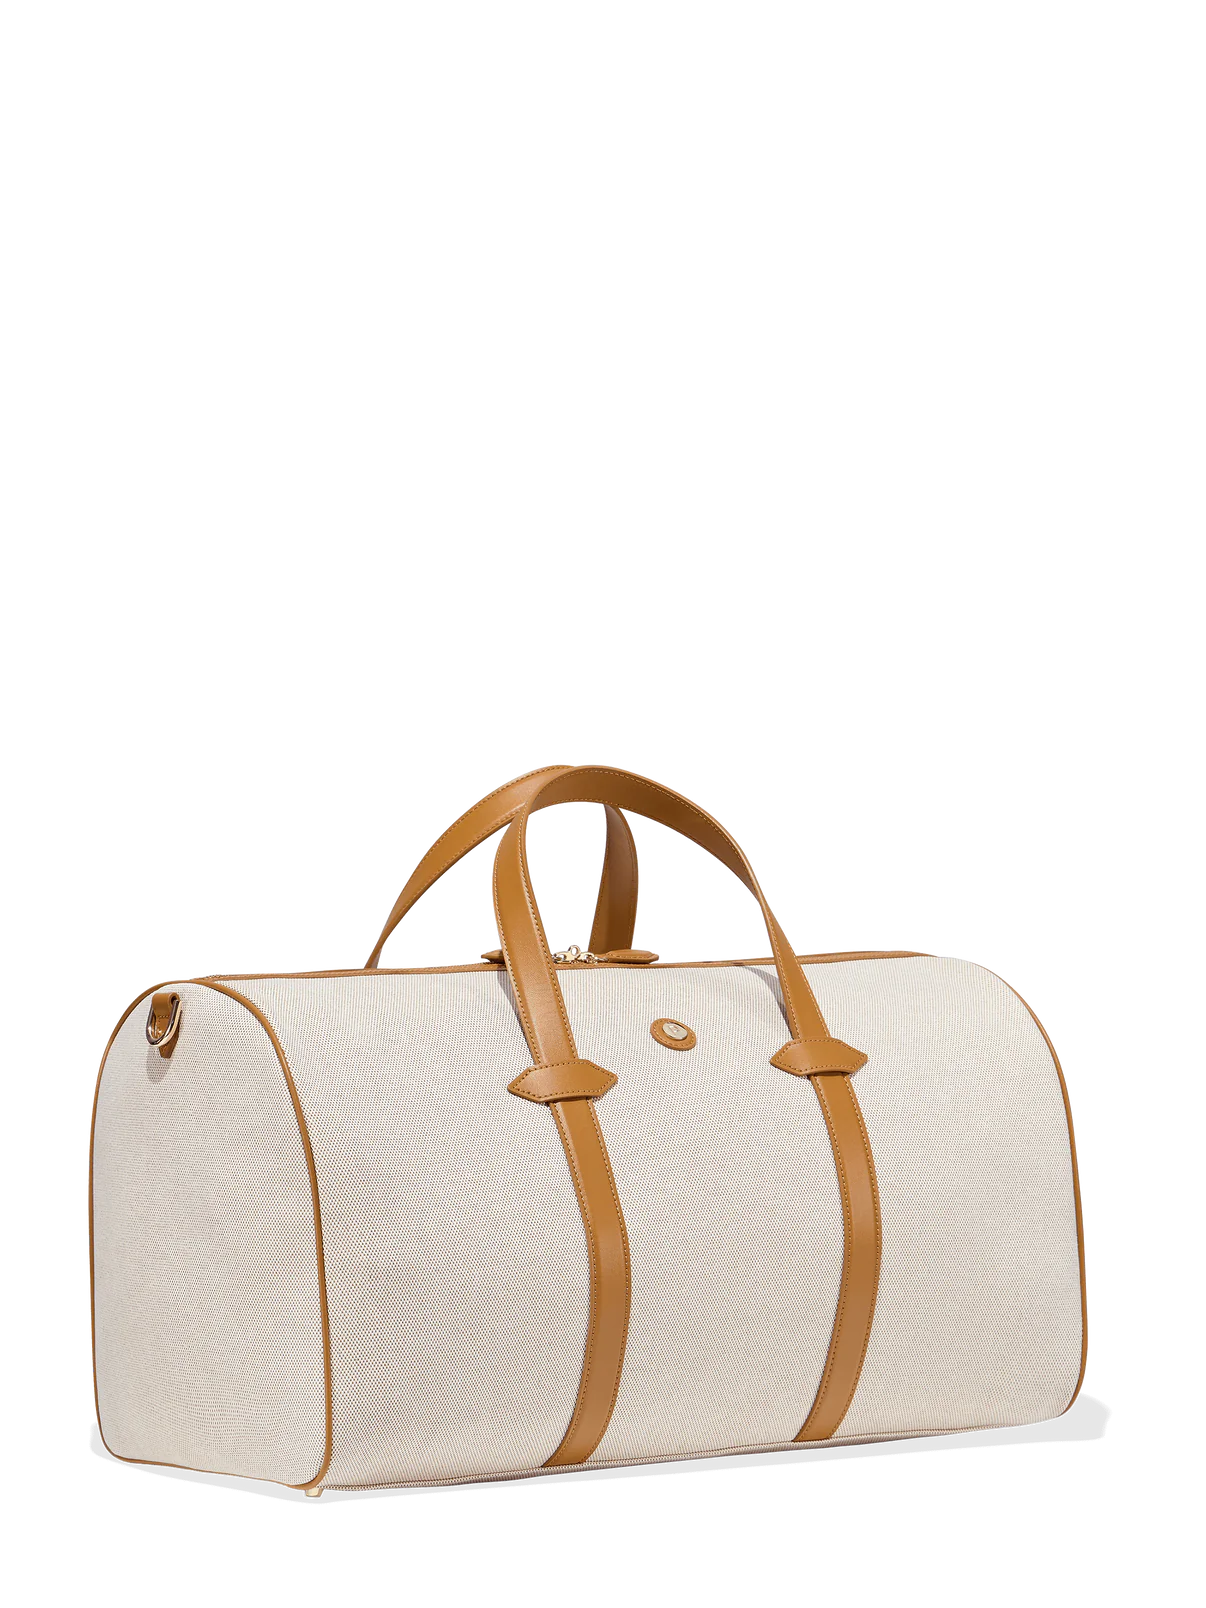 Main Line Duffel bag that goes well with all airport outfits.